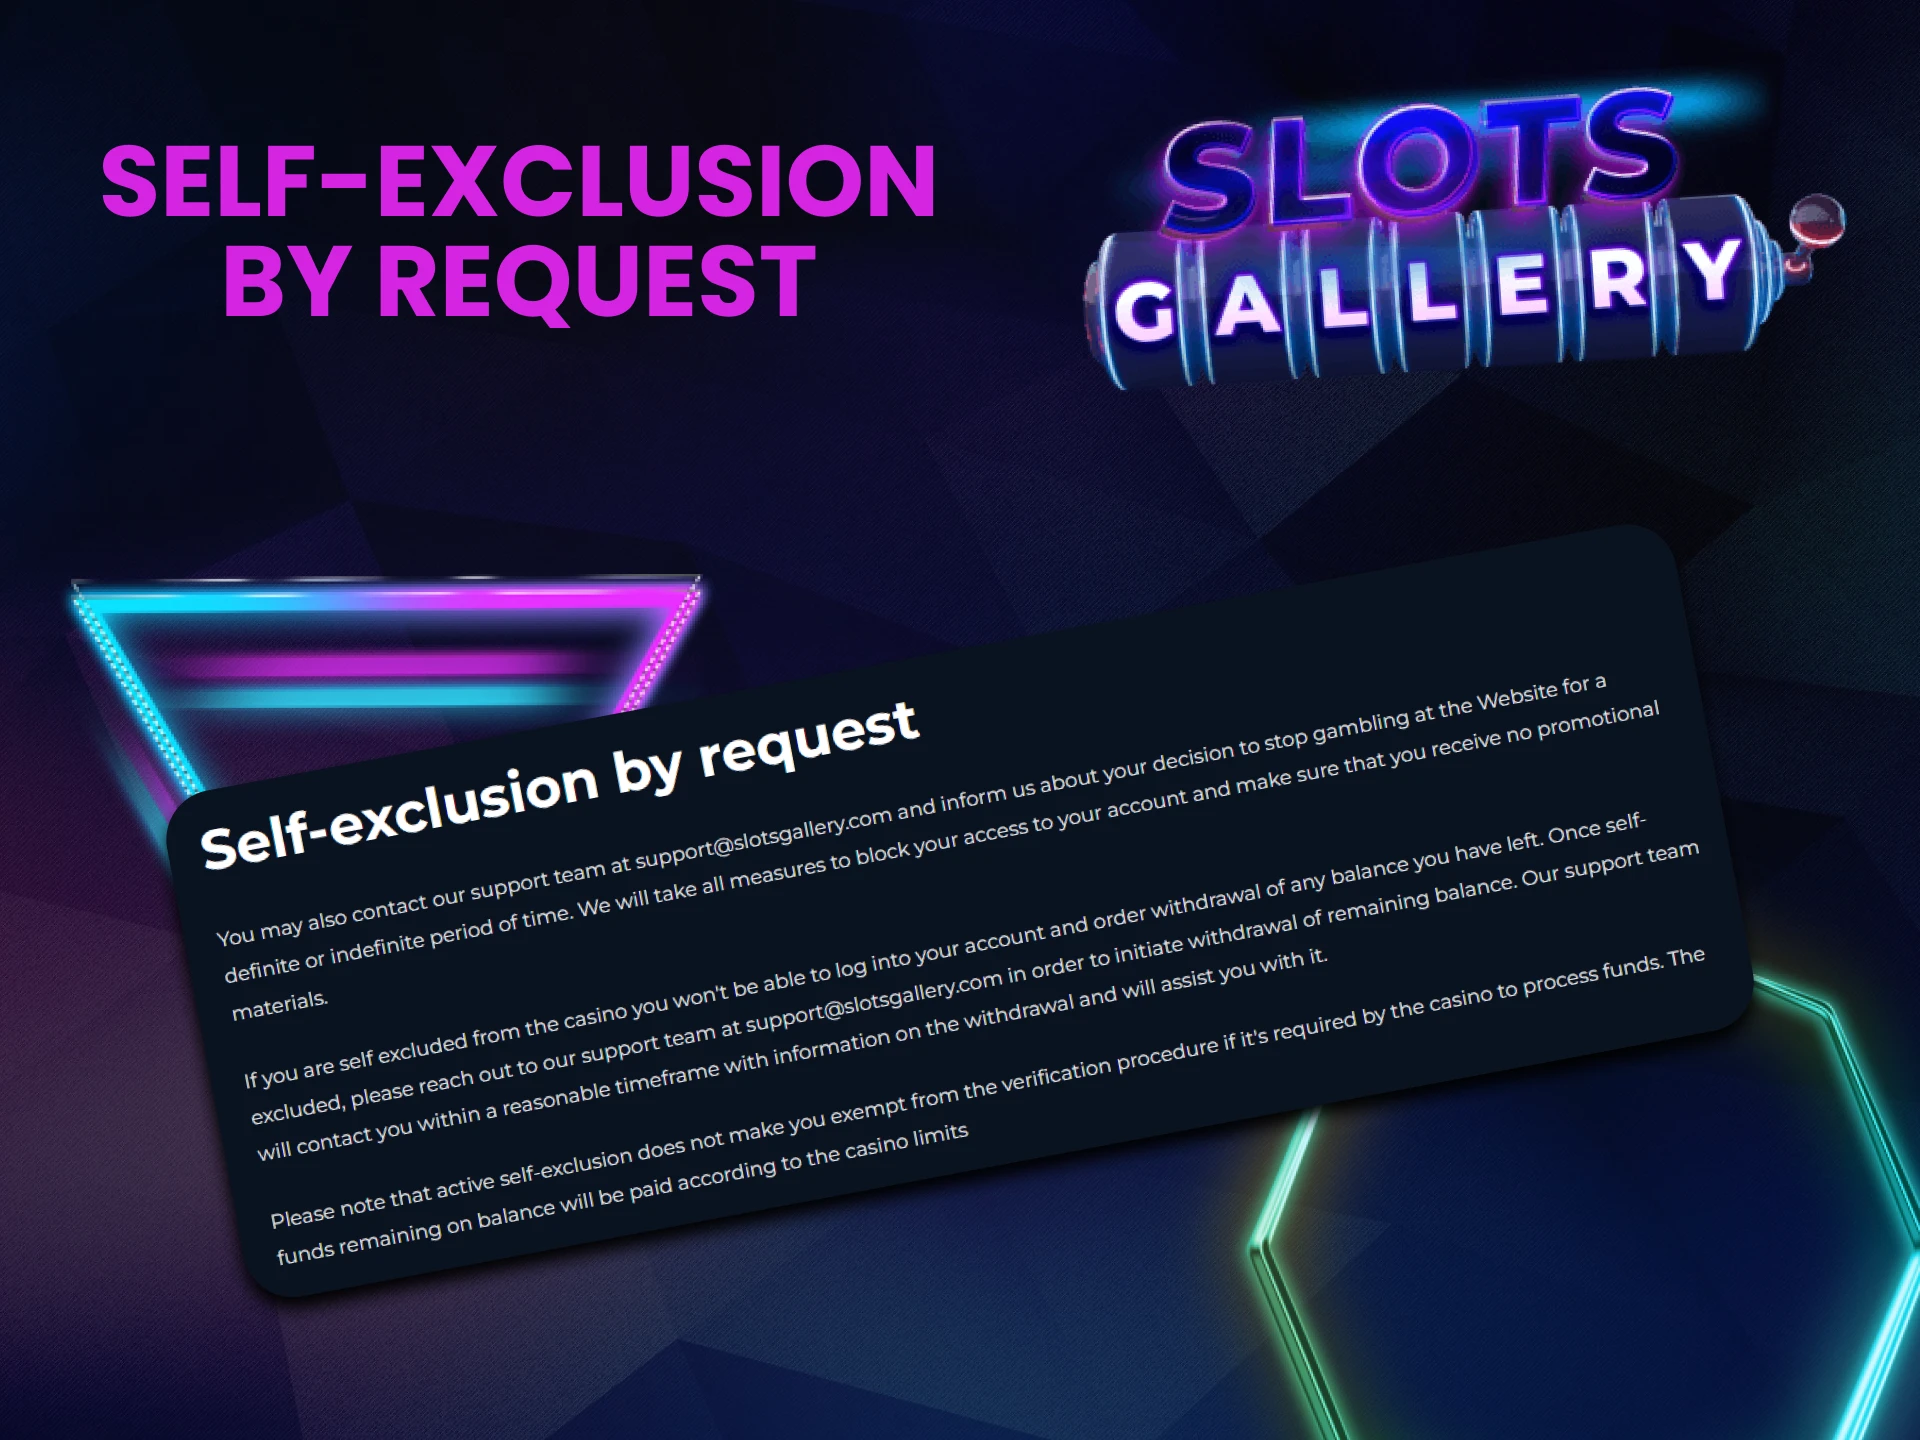 You can ask Slots Gallery to freeze your account for a while.